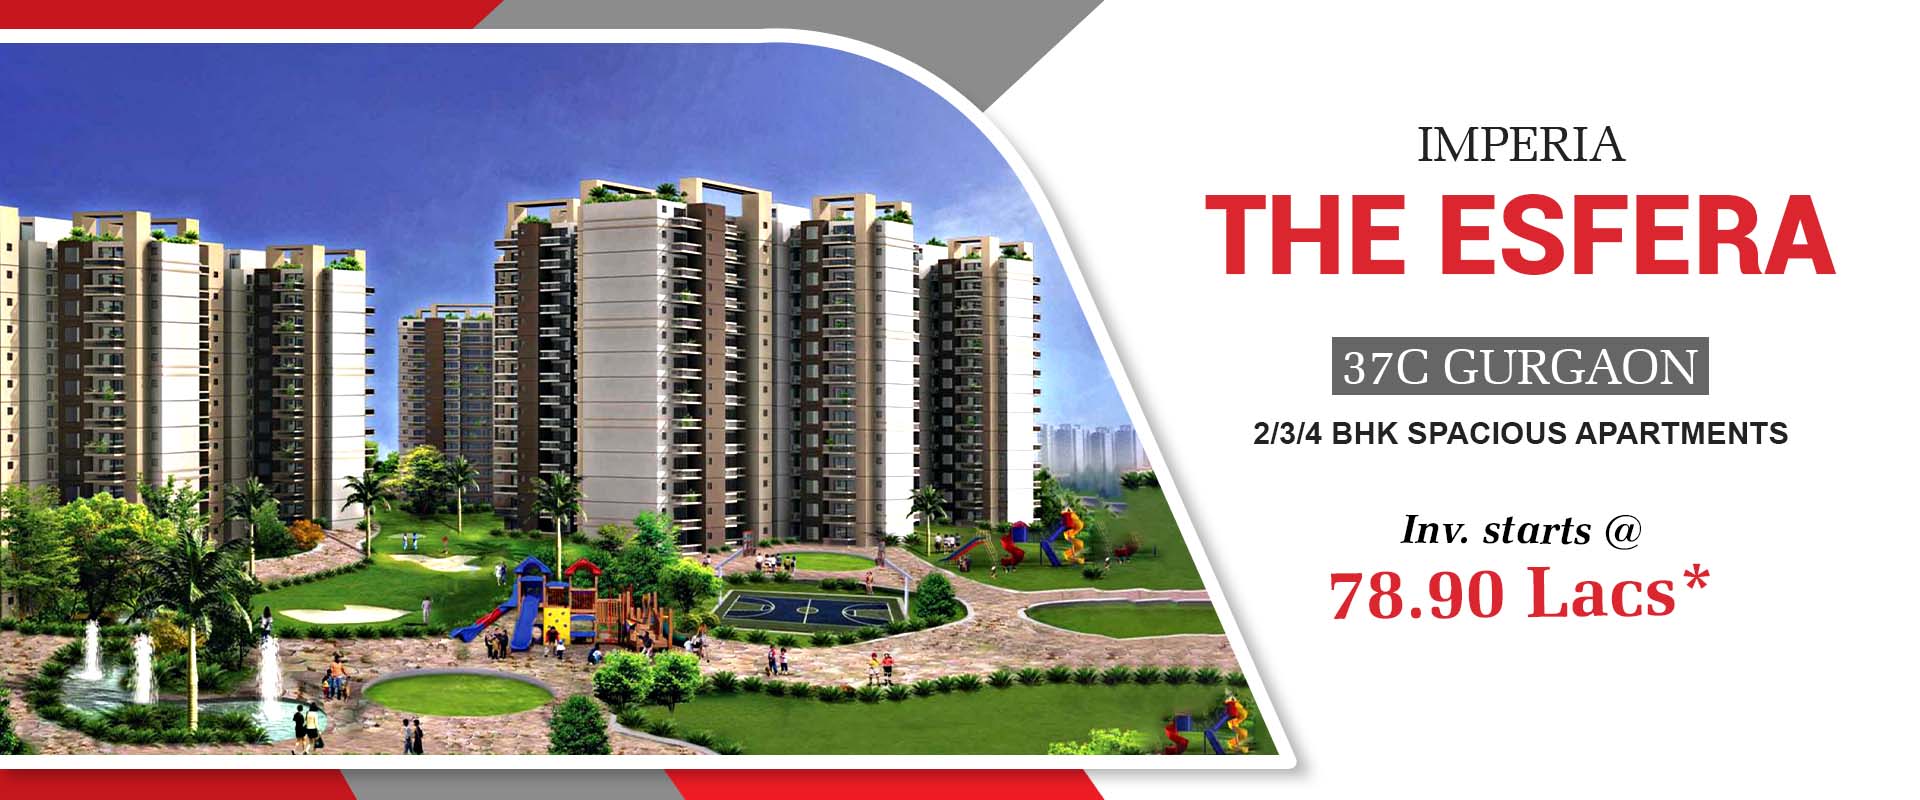 Book 2/3/4 BHK ready to move spacious aptmts Rs 78.90 Lac at Imperia The Esfera in Gurgaon Update